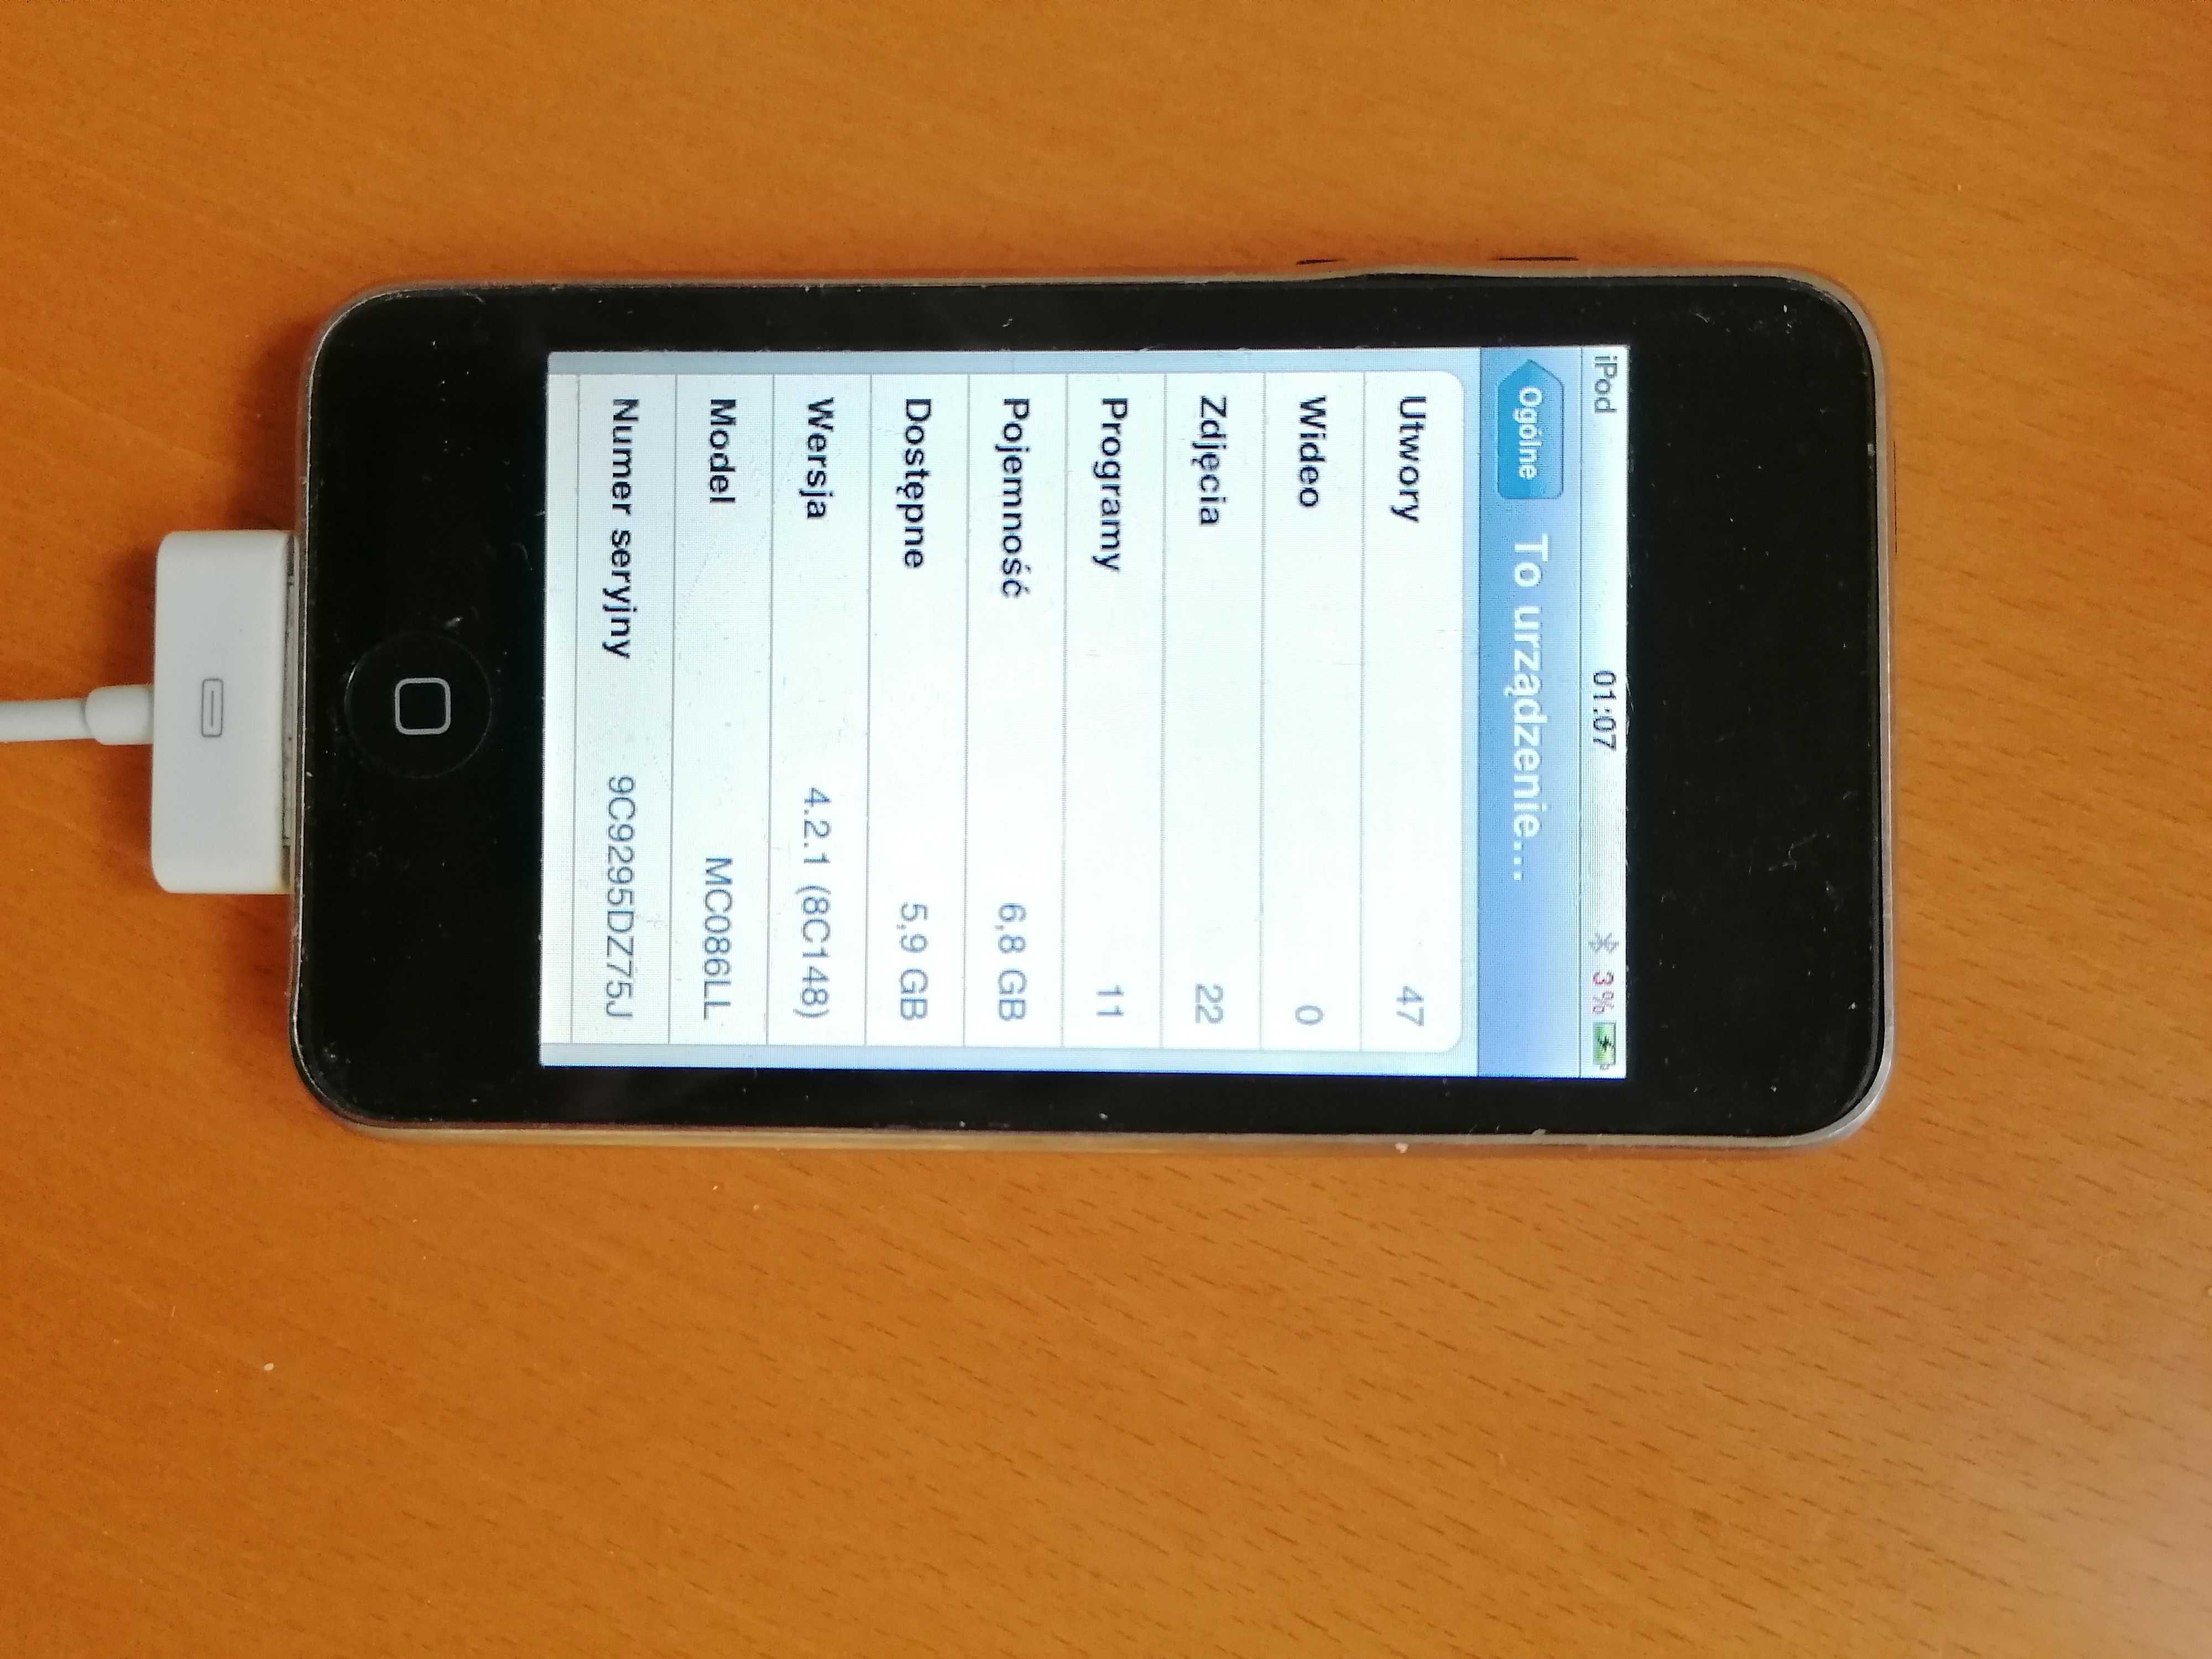 Ipod touch 8gb 4.2.1 8GB